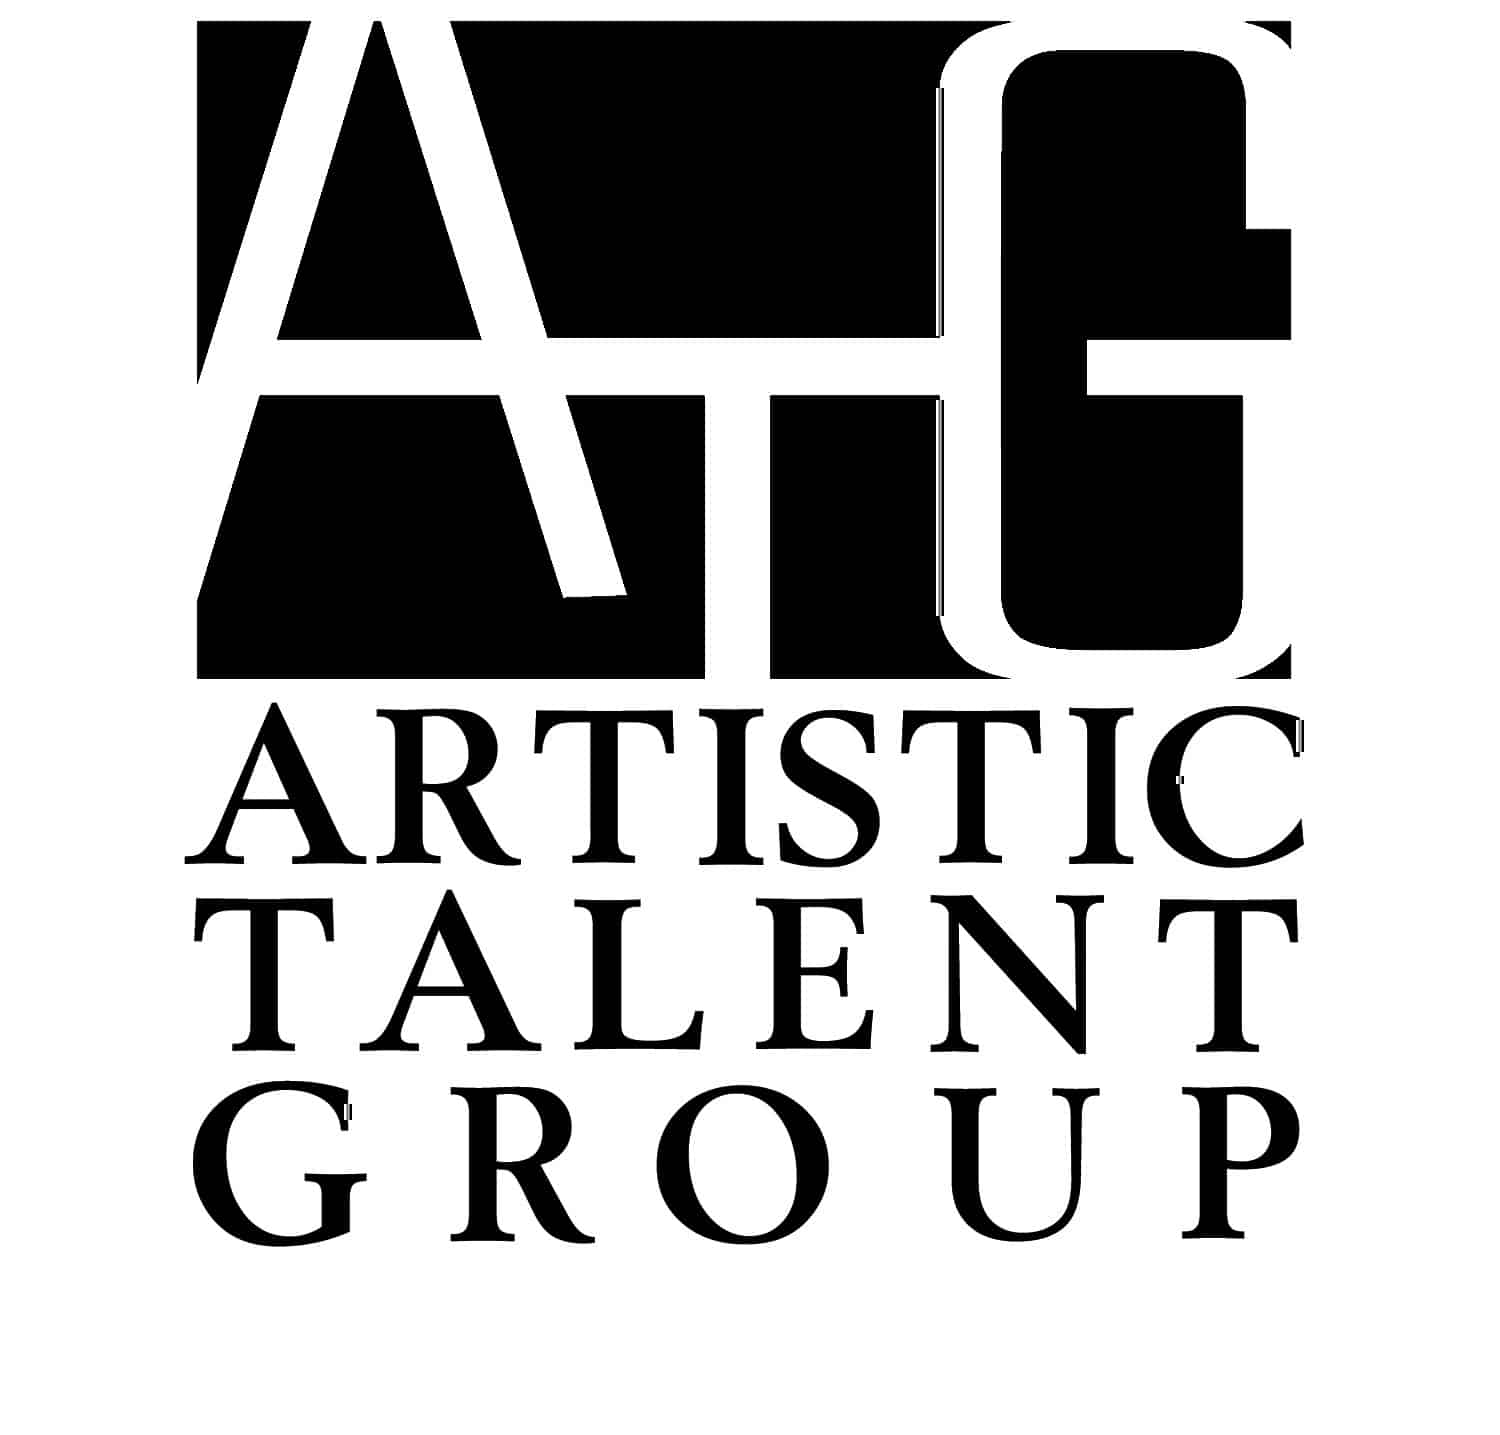 Artistic Talent Group